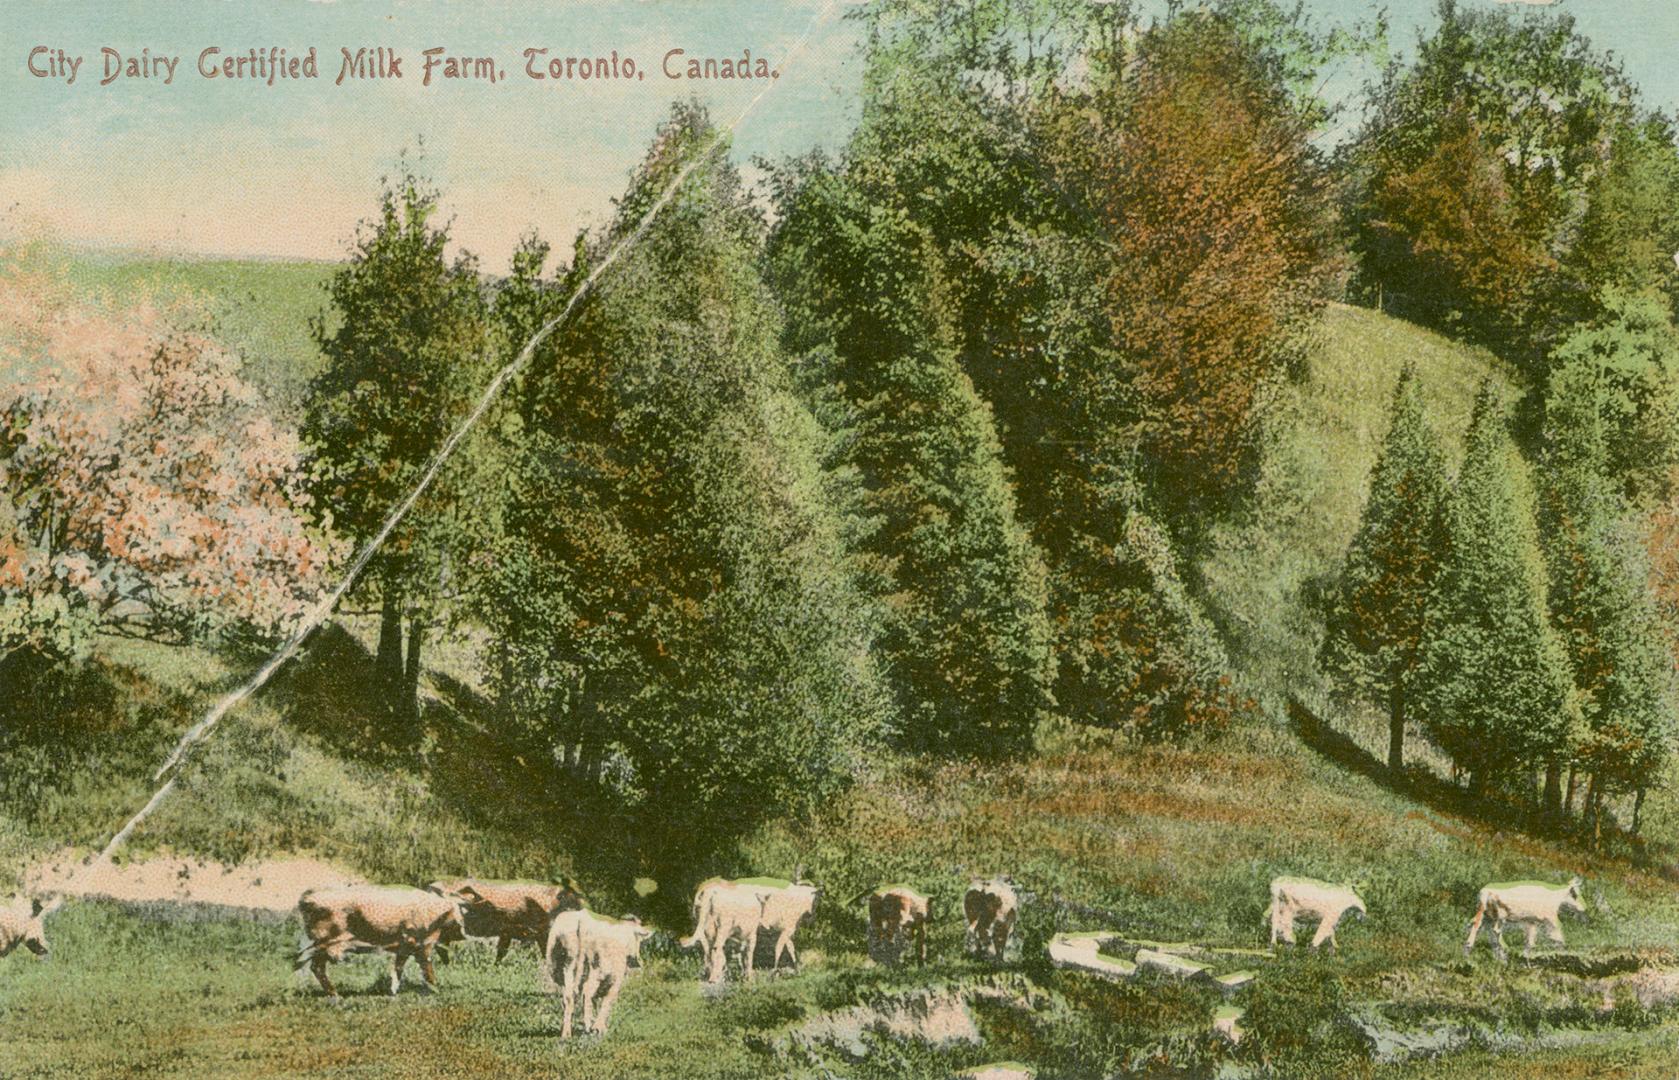 A herd of Jersey cows standing in a river in a grassy valley.